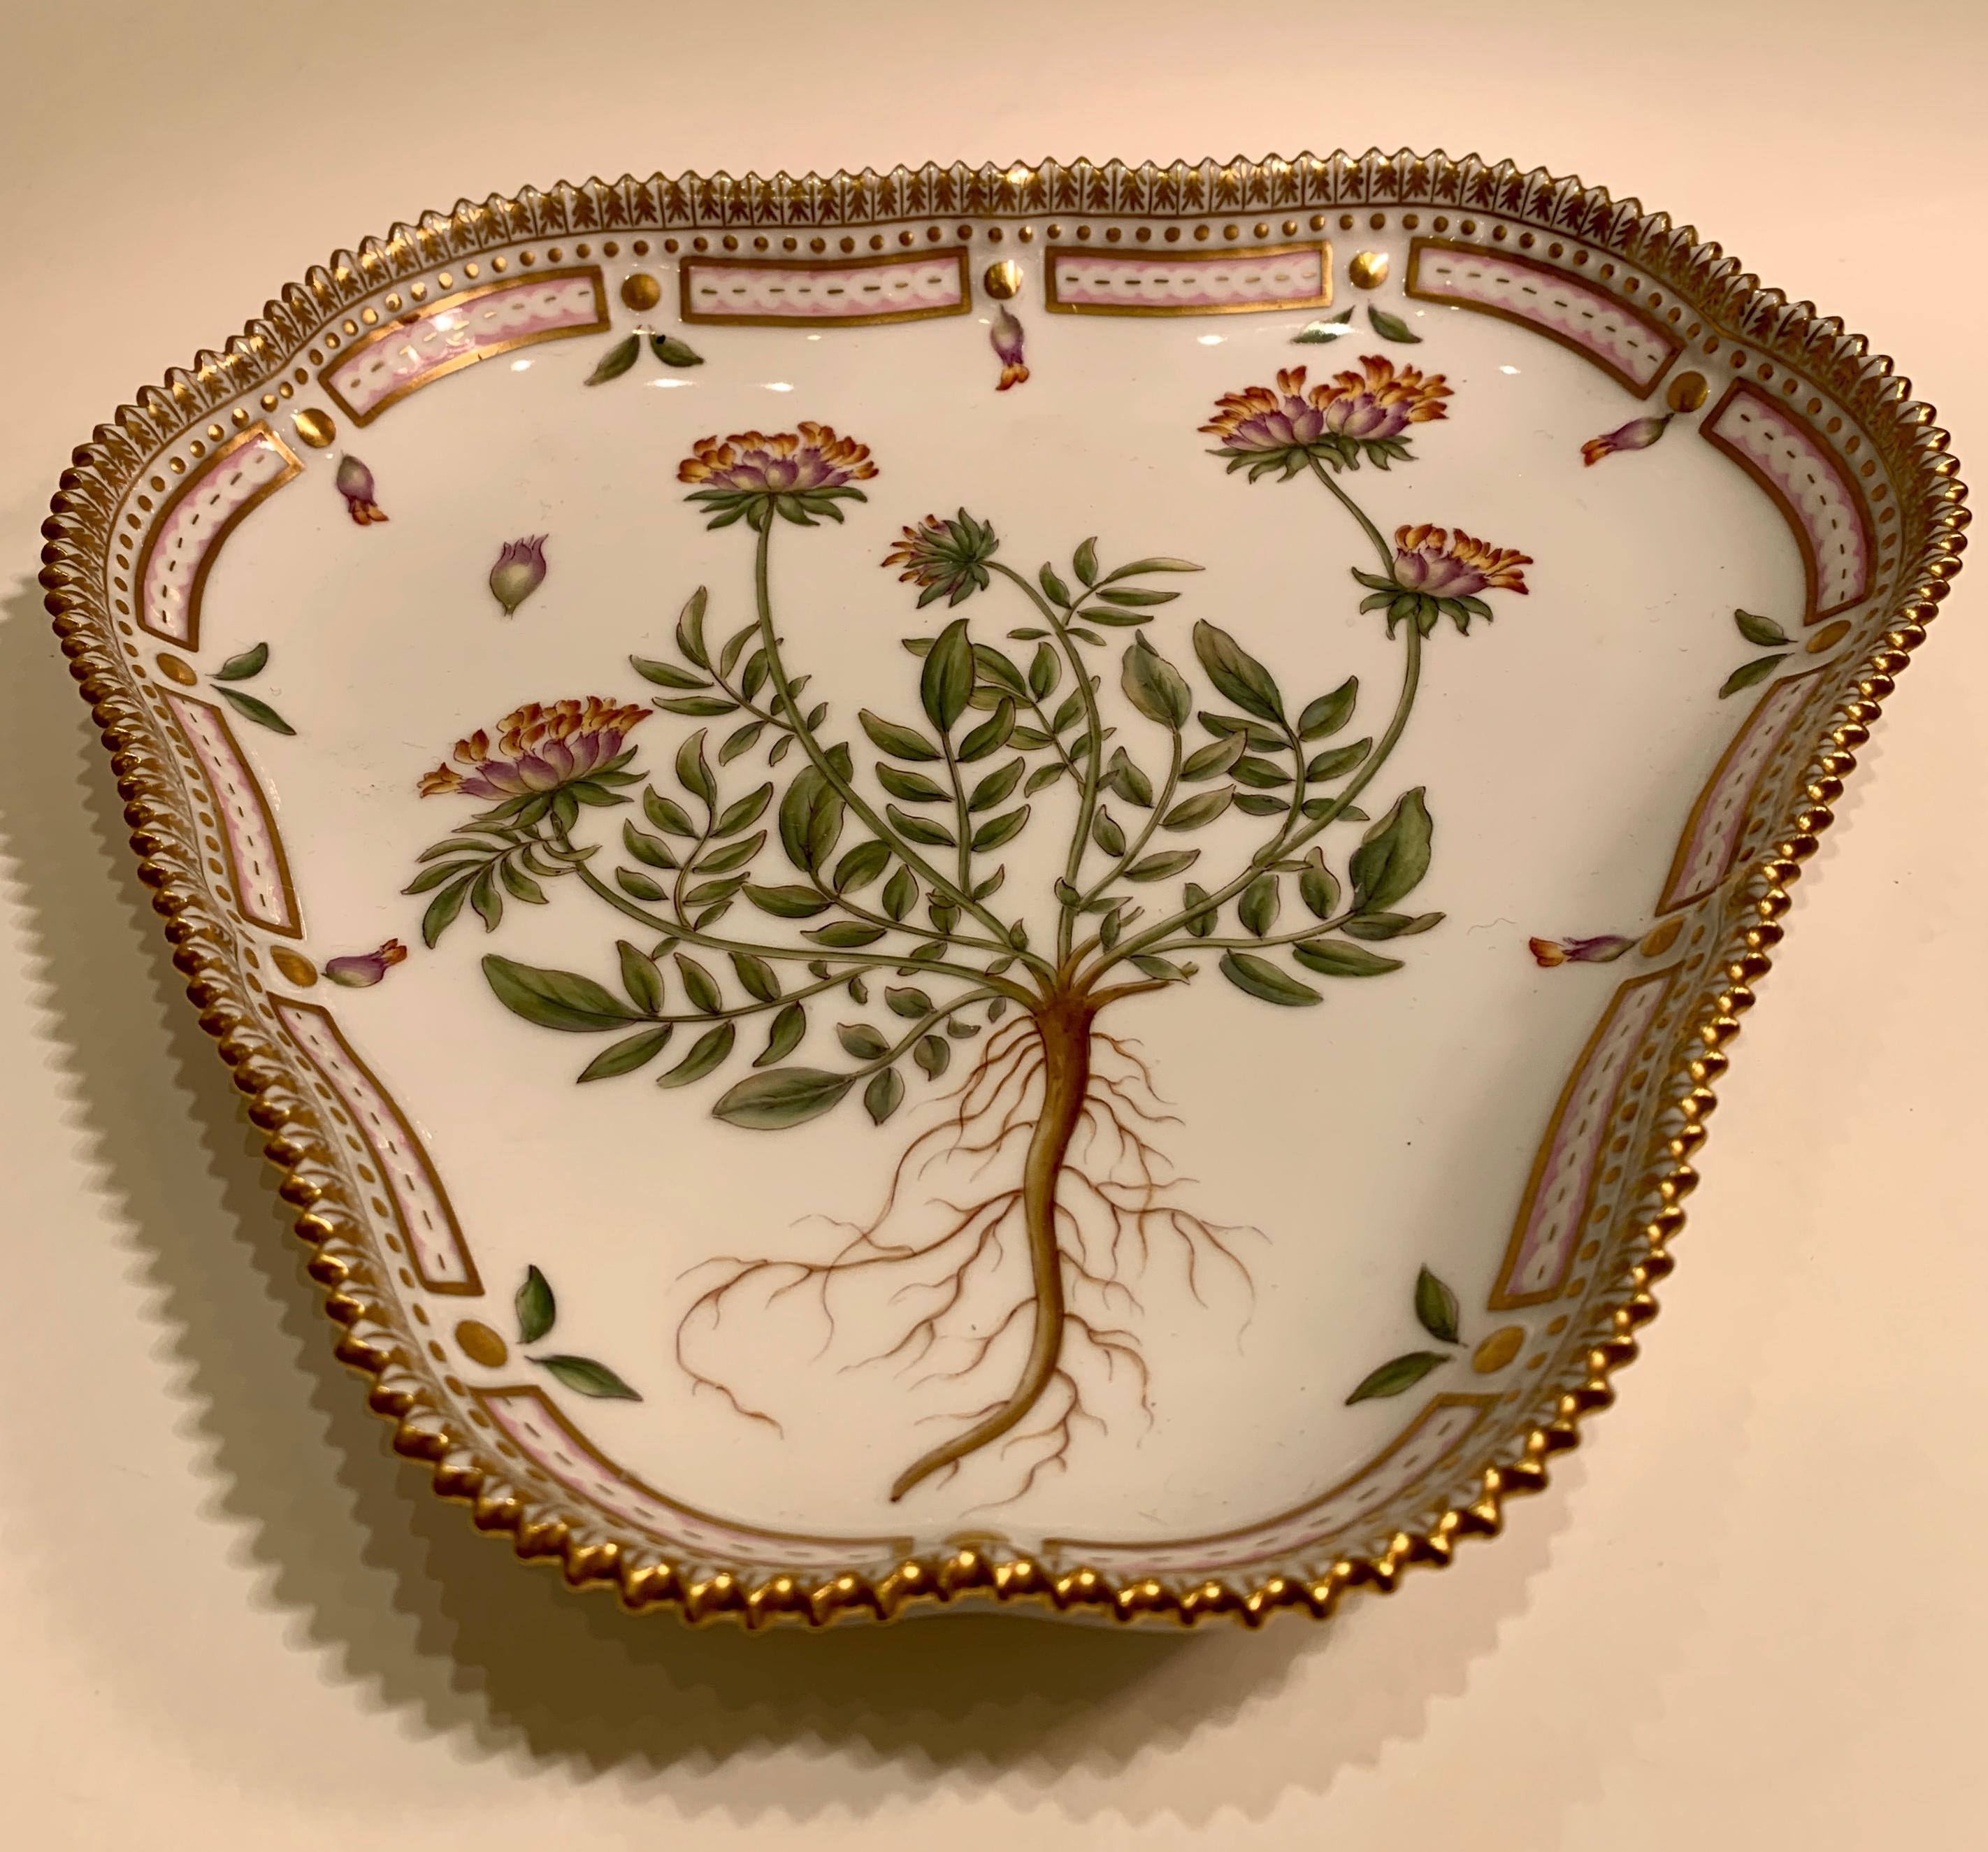 Finest quality, elegantly handmade and meticulously hand painted Royal Copenhagen triangular dish or cake dish with the delicate botanical design, 